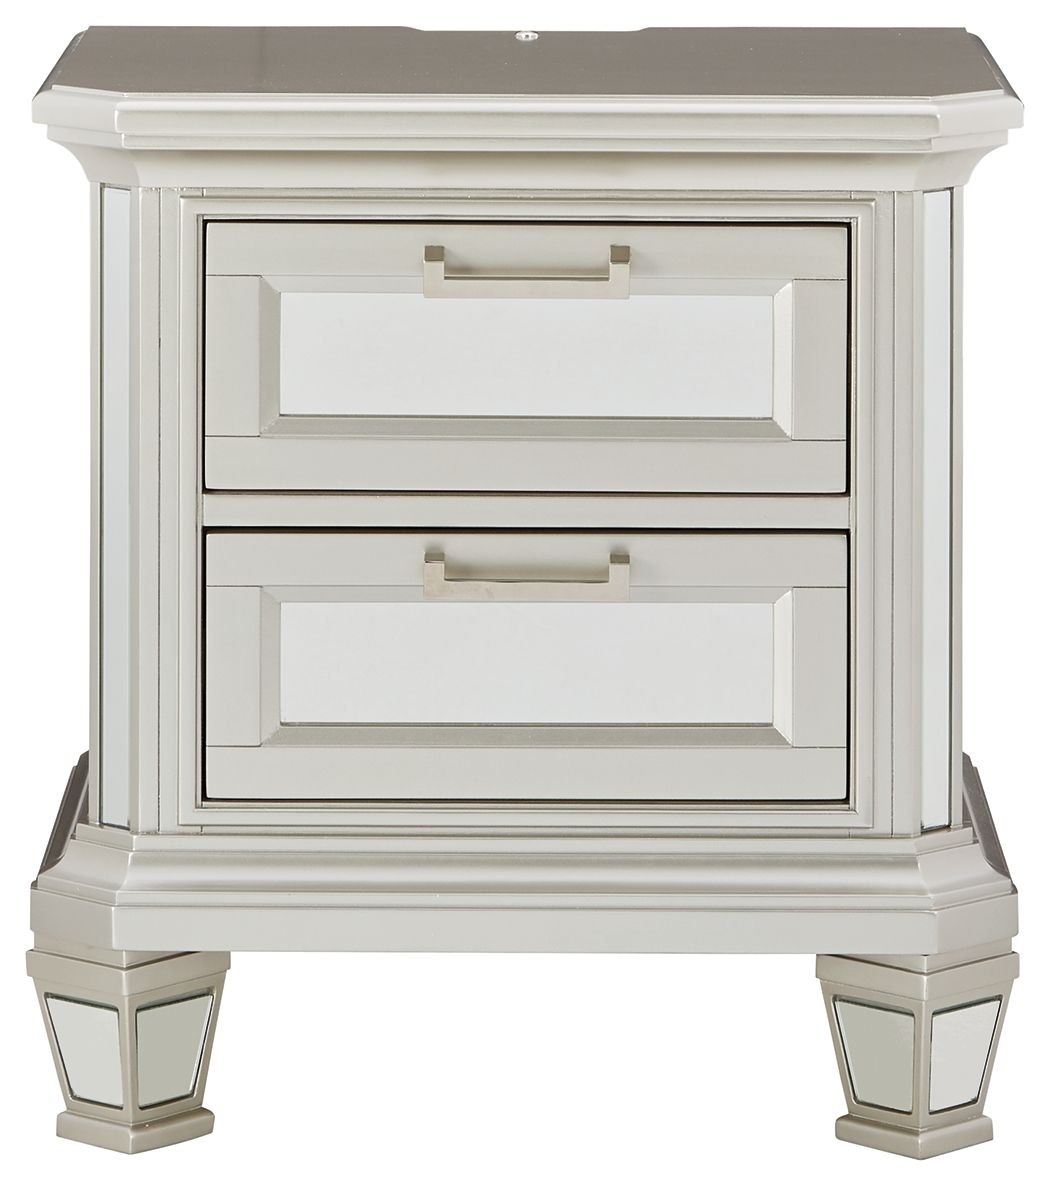 Lindenfield - Silver - Two Drawer Night Stand